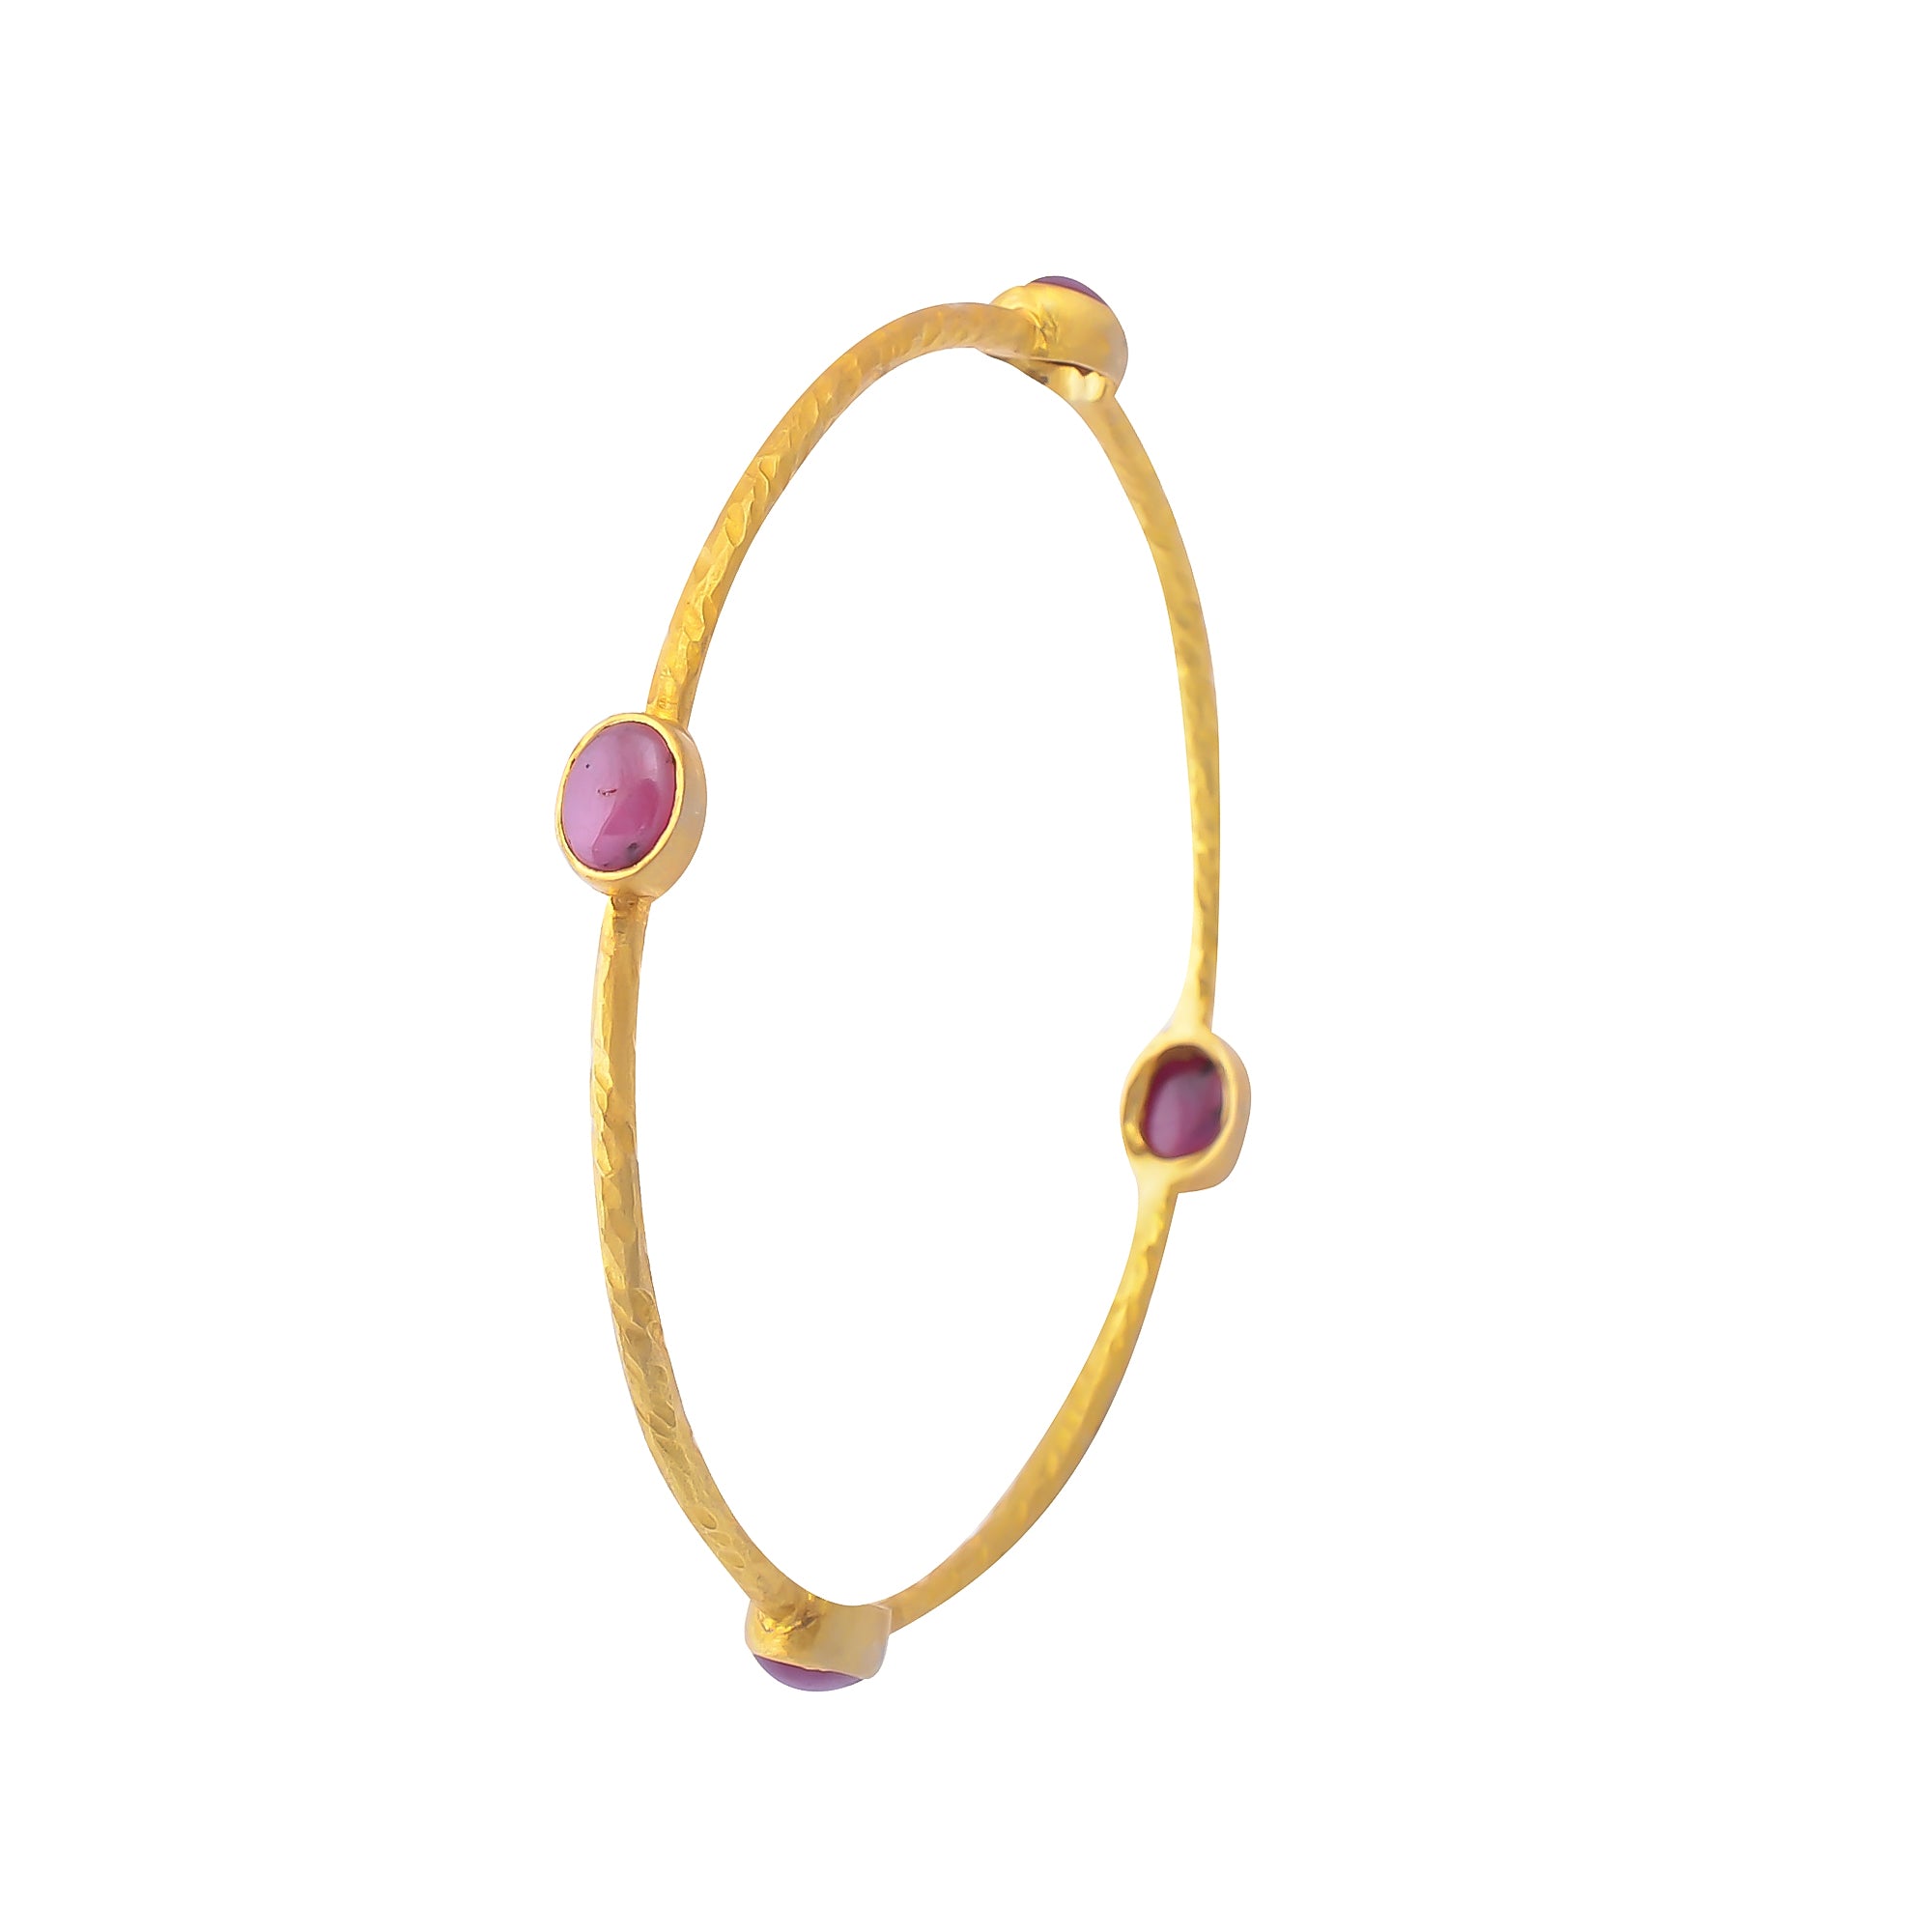 Buy Luxury Handmade Silver Gold Plated Ruby Bangle